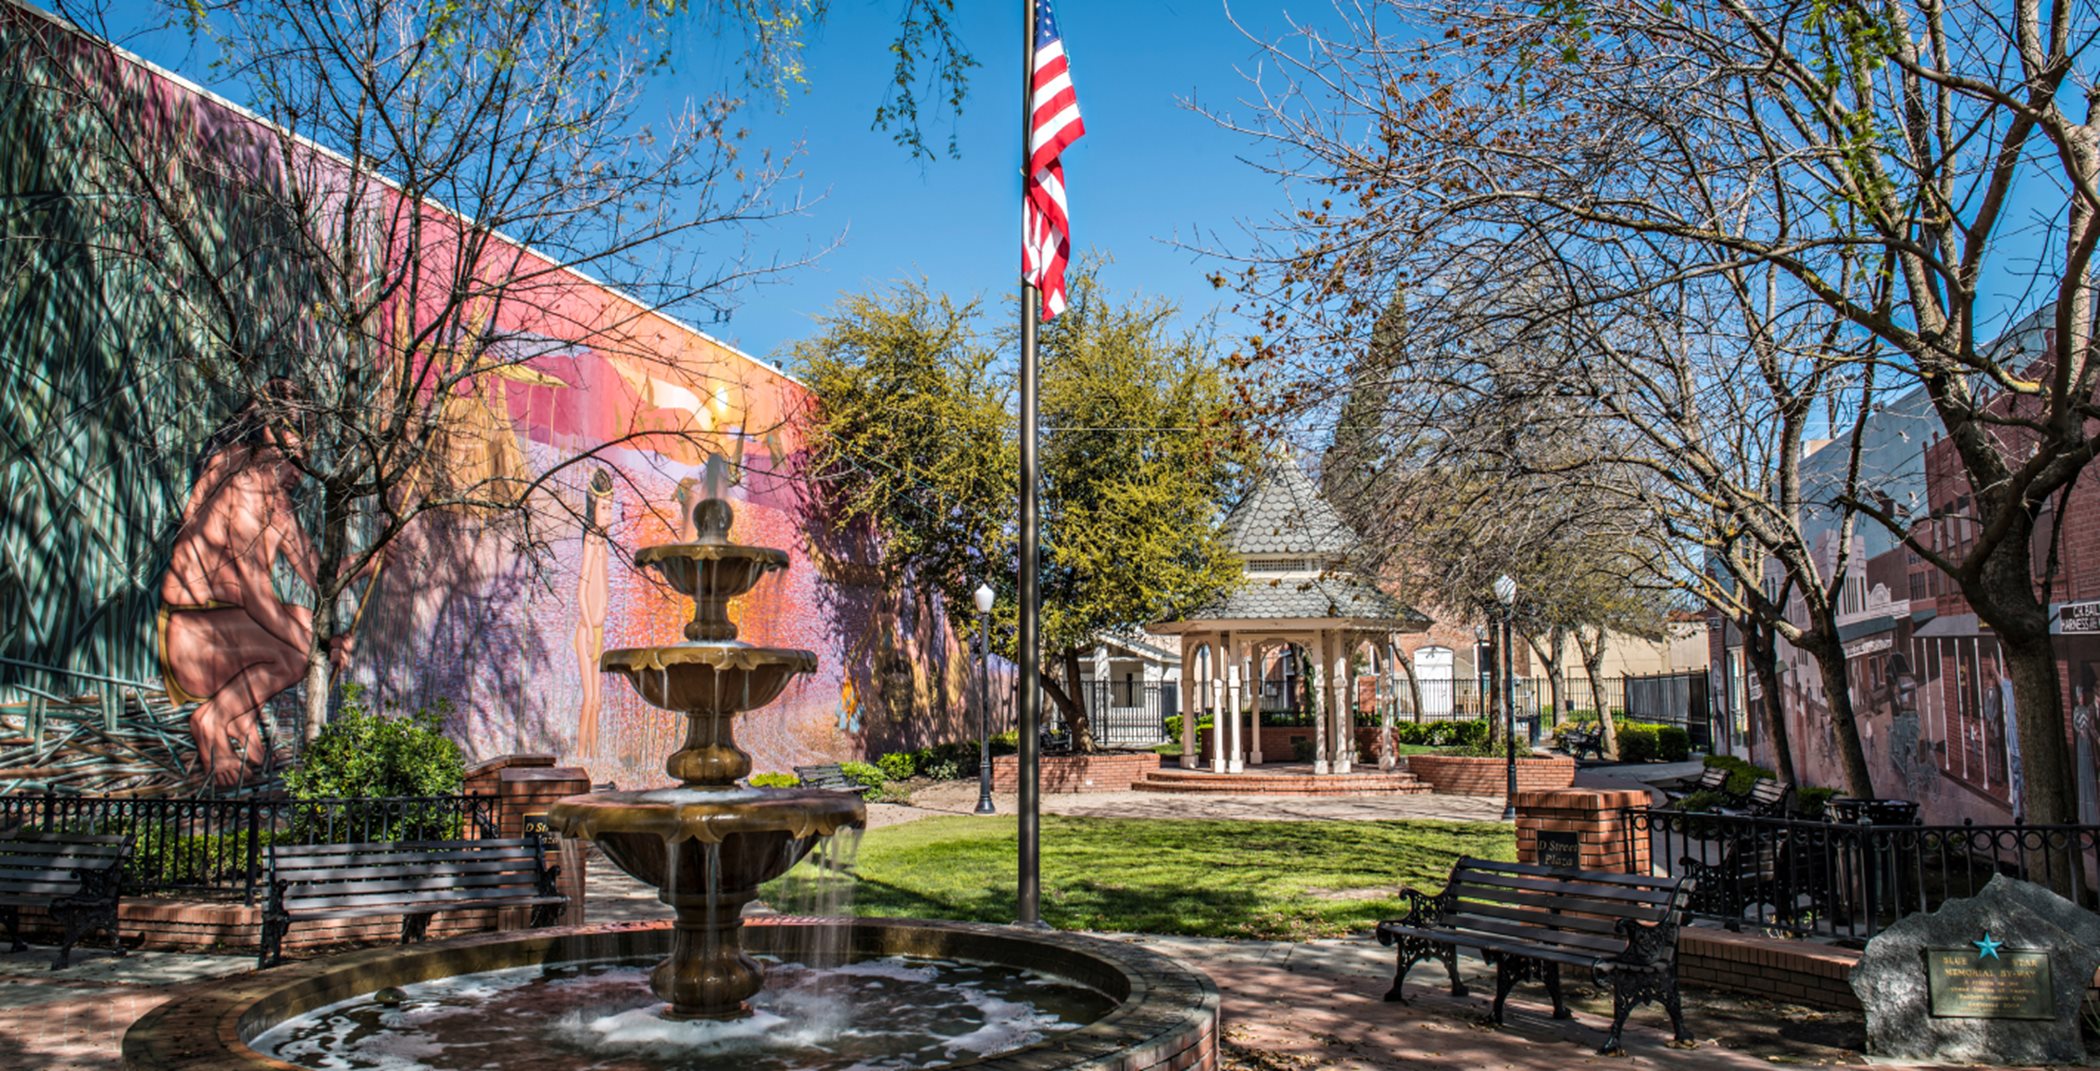 Local park of Lemoore with fountain and mural